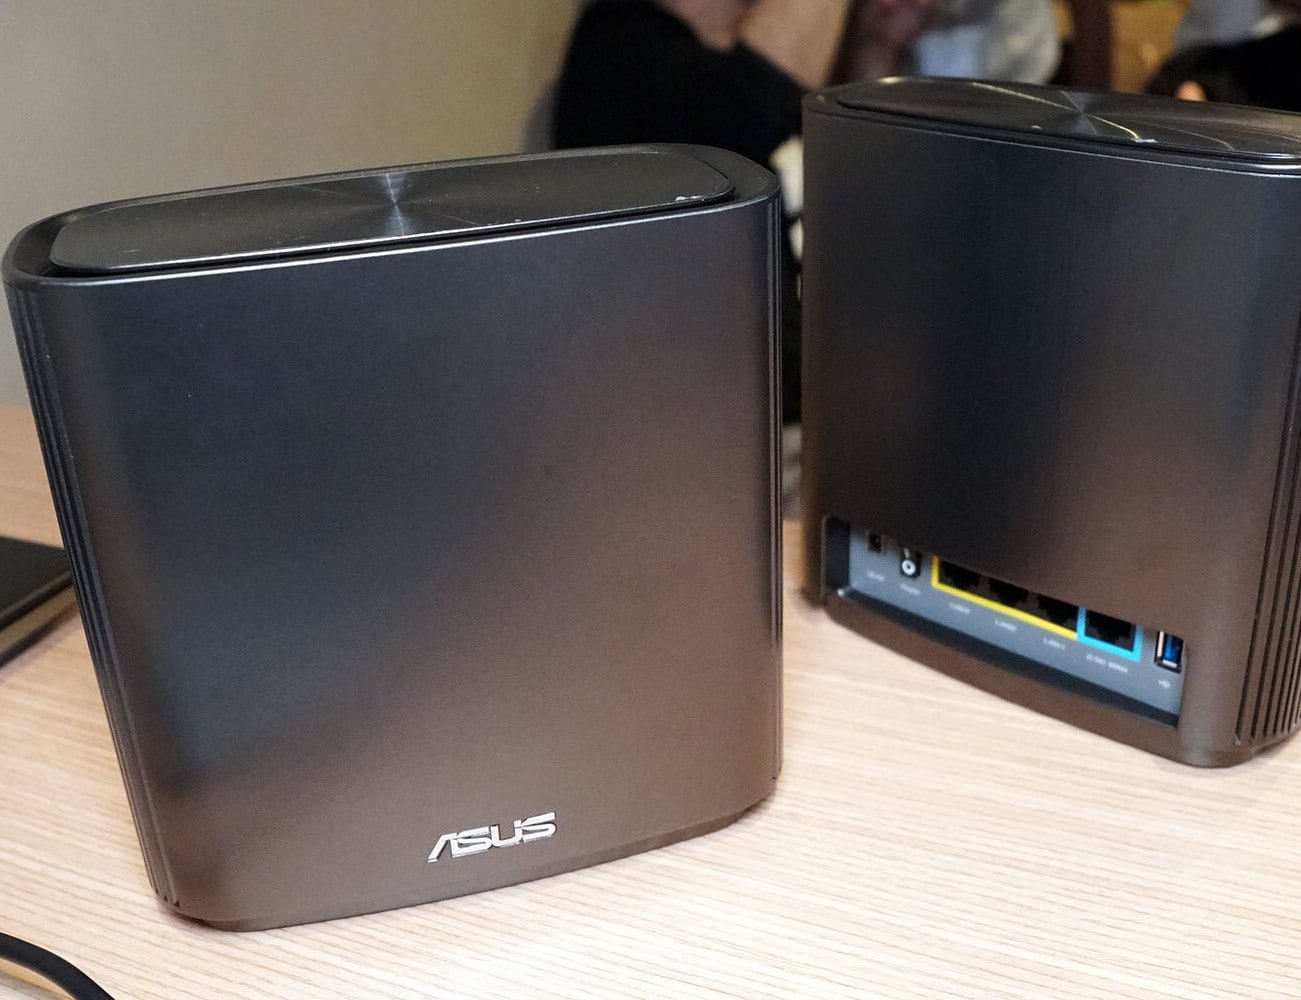 ASUS AiMesh AX6600 Super-Fast Wi-Fi 6 Routers will speed up your internet experience